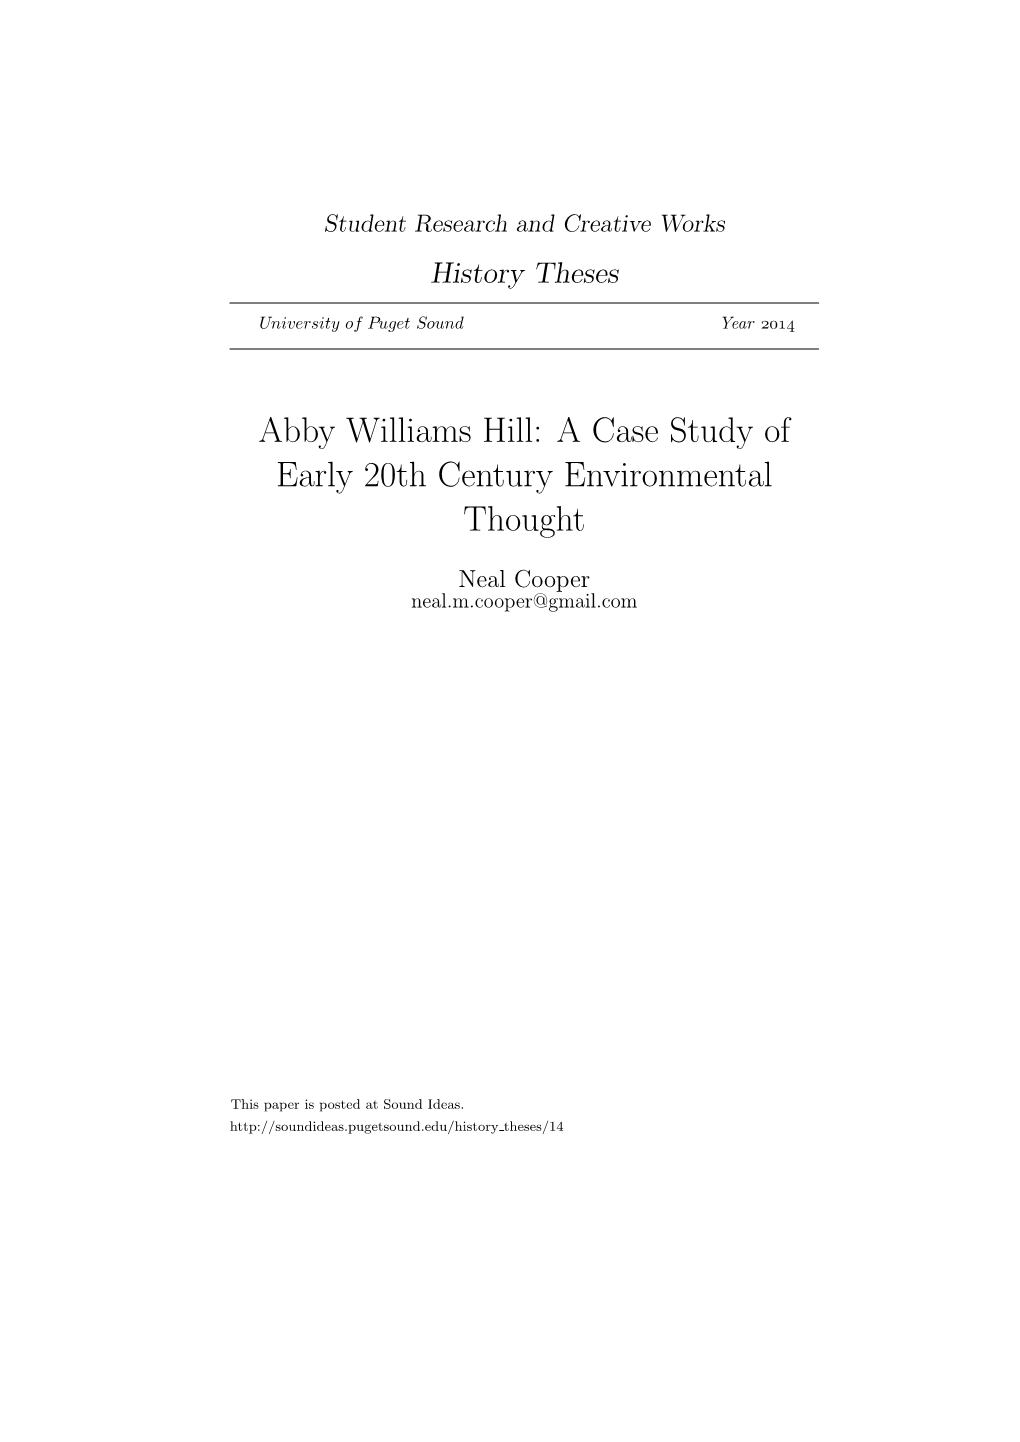 Abby Williams Hill: a Case Study of Early 20Th Century Environmental Thought